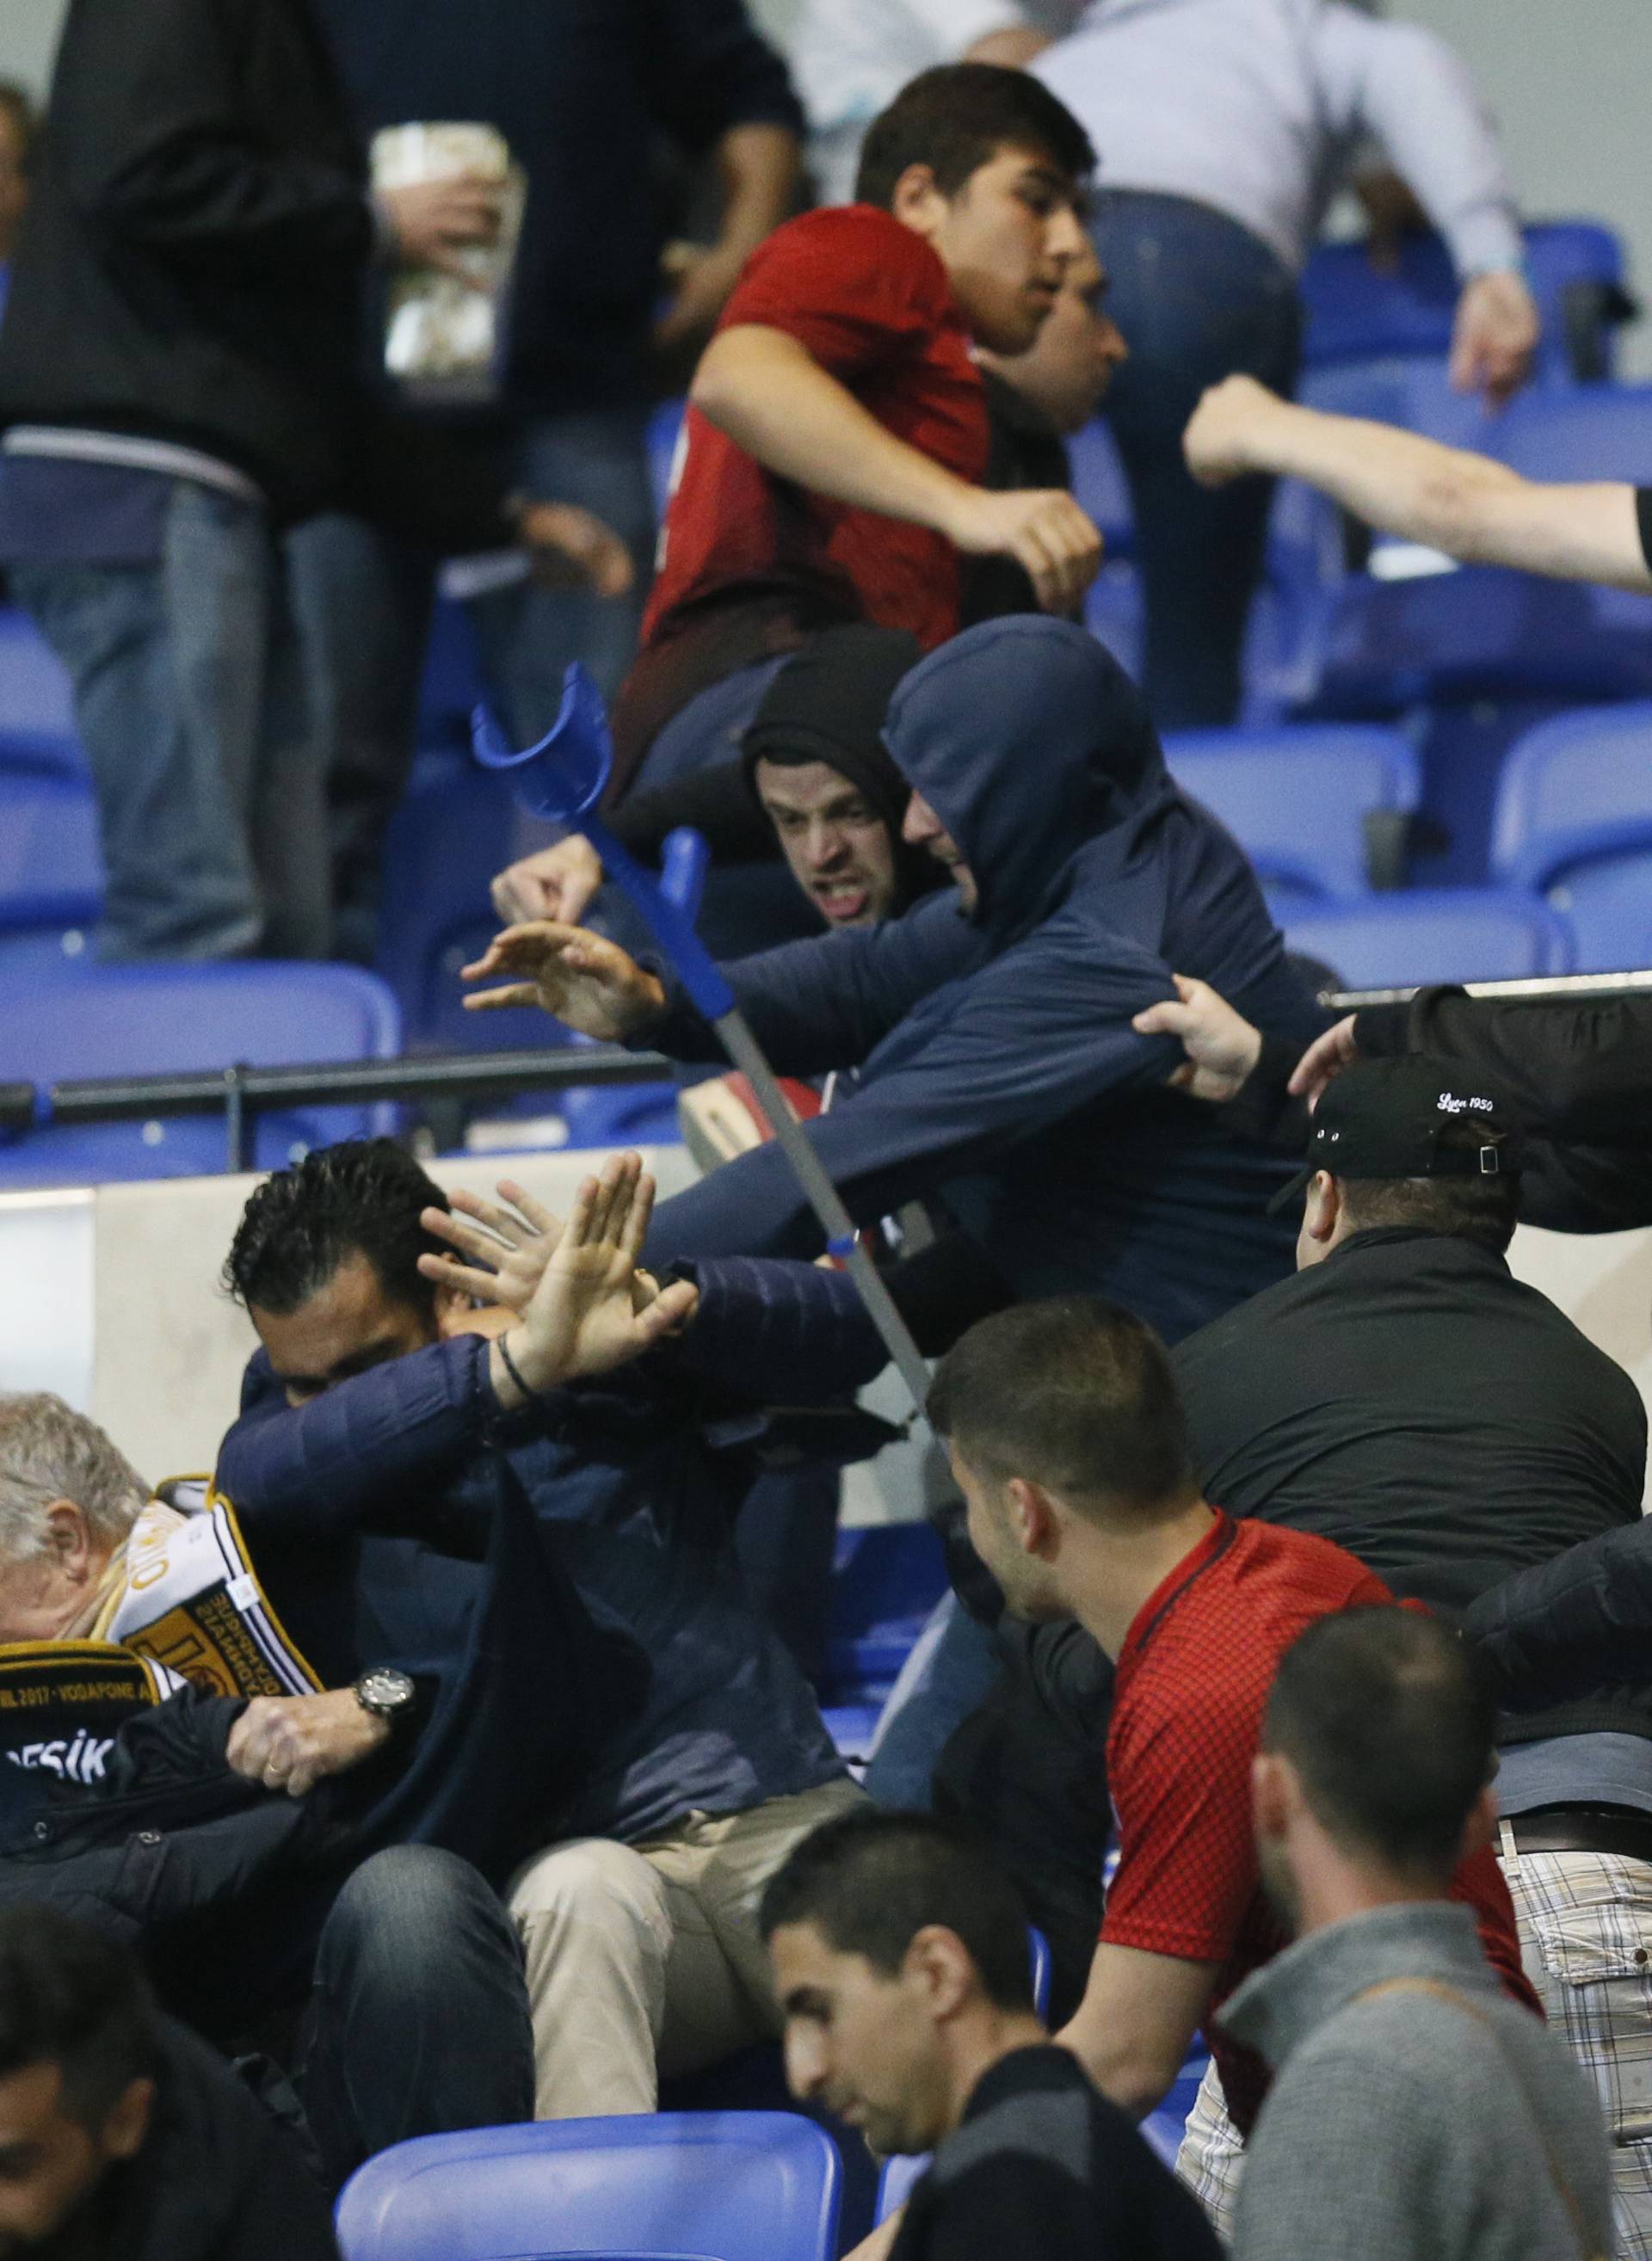 Besiktas and Lyon fans clash in the stands